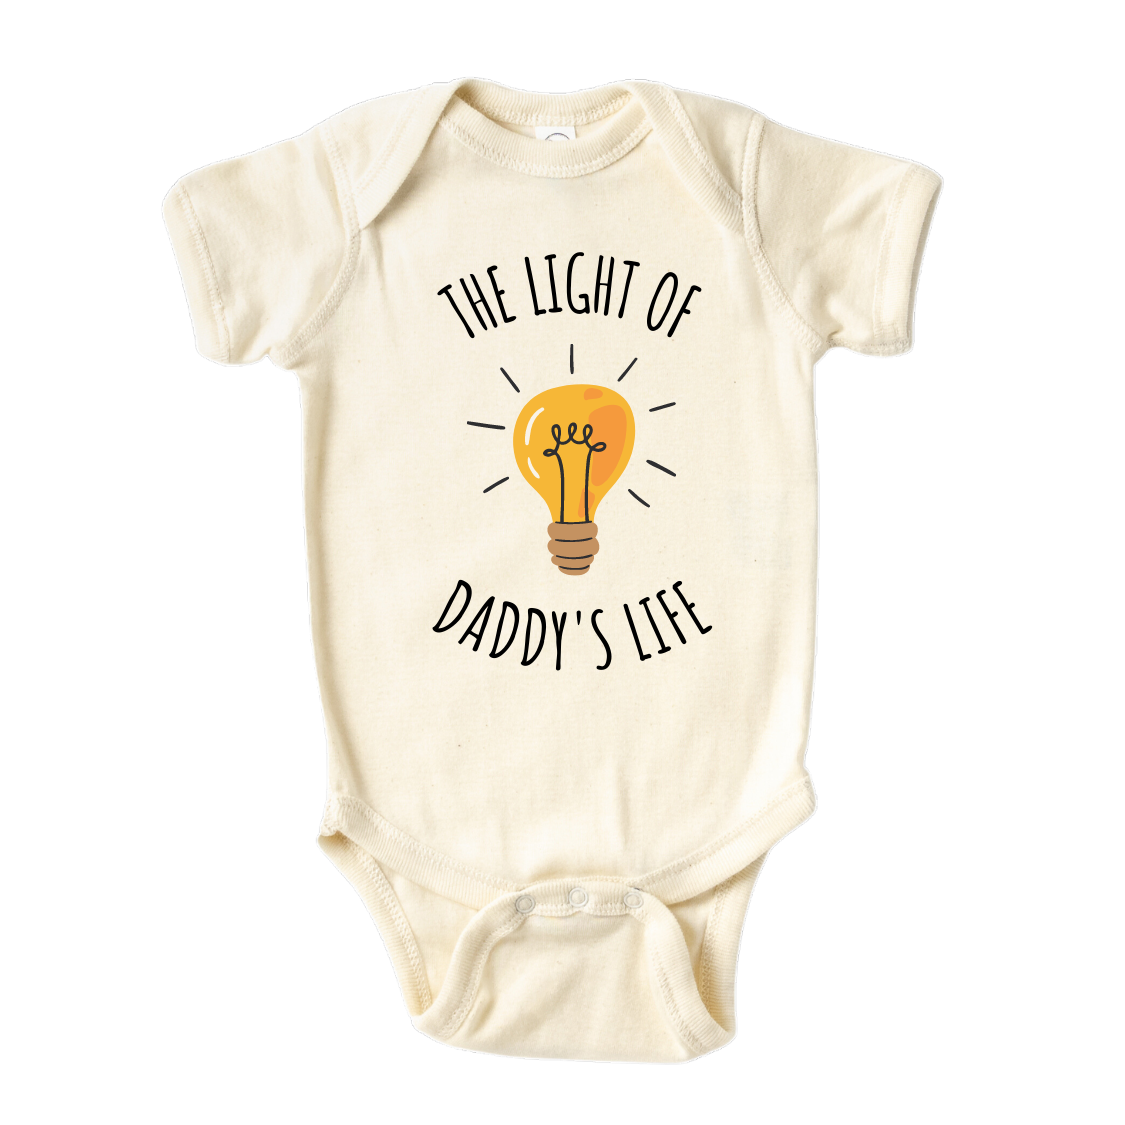 Baby Onesie Made with high-quality materials, it offers comfort and durability, making it a perfect addition to any child's wardrobe.